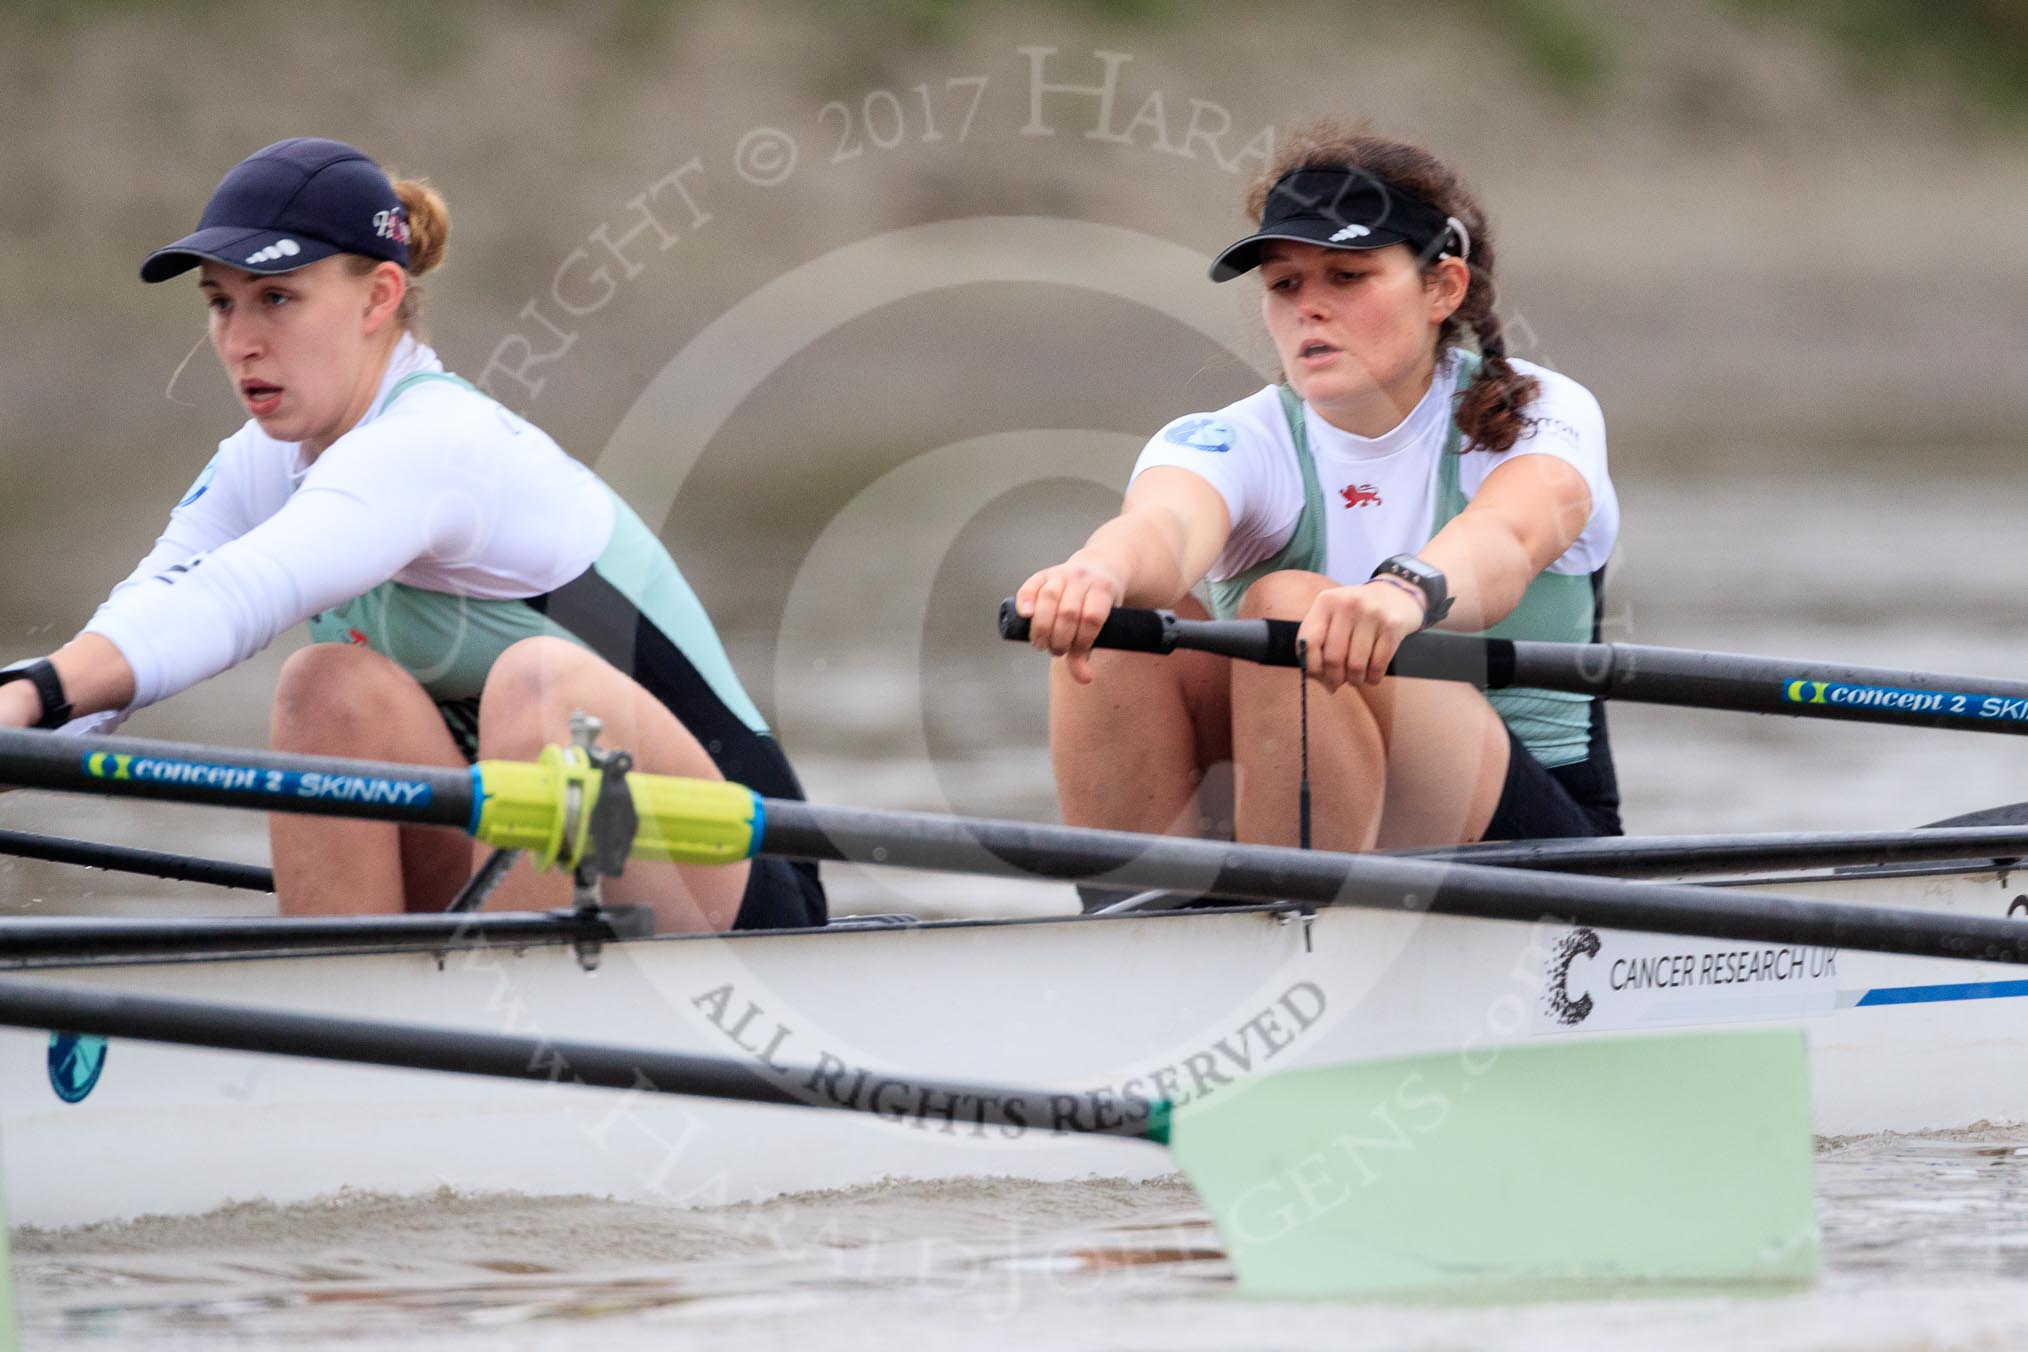 The Boat Race season 2018 - Women's Boat Race Trial Eights (CUWBC, Cambridge): Expecto Patronum, here 2 Millie Perrin, bow Eve Caroe.
River Thames between Putney Bridge and Mortlake,
London SW15,

United Kingdom,
on 05 December 2017 at 12:45, image #81